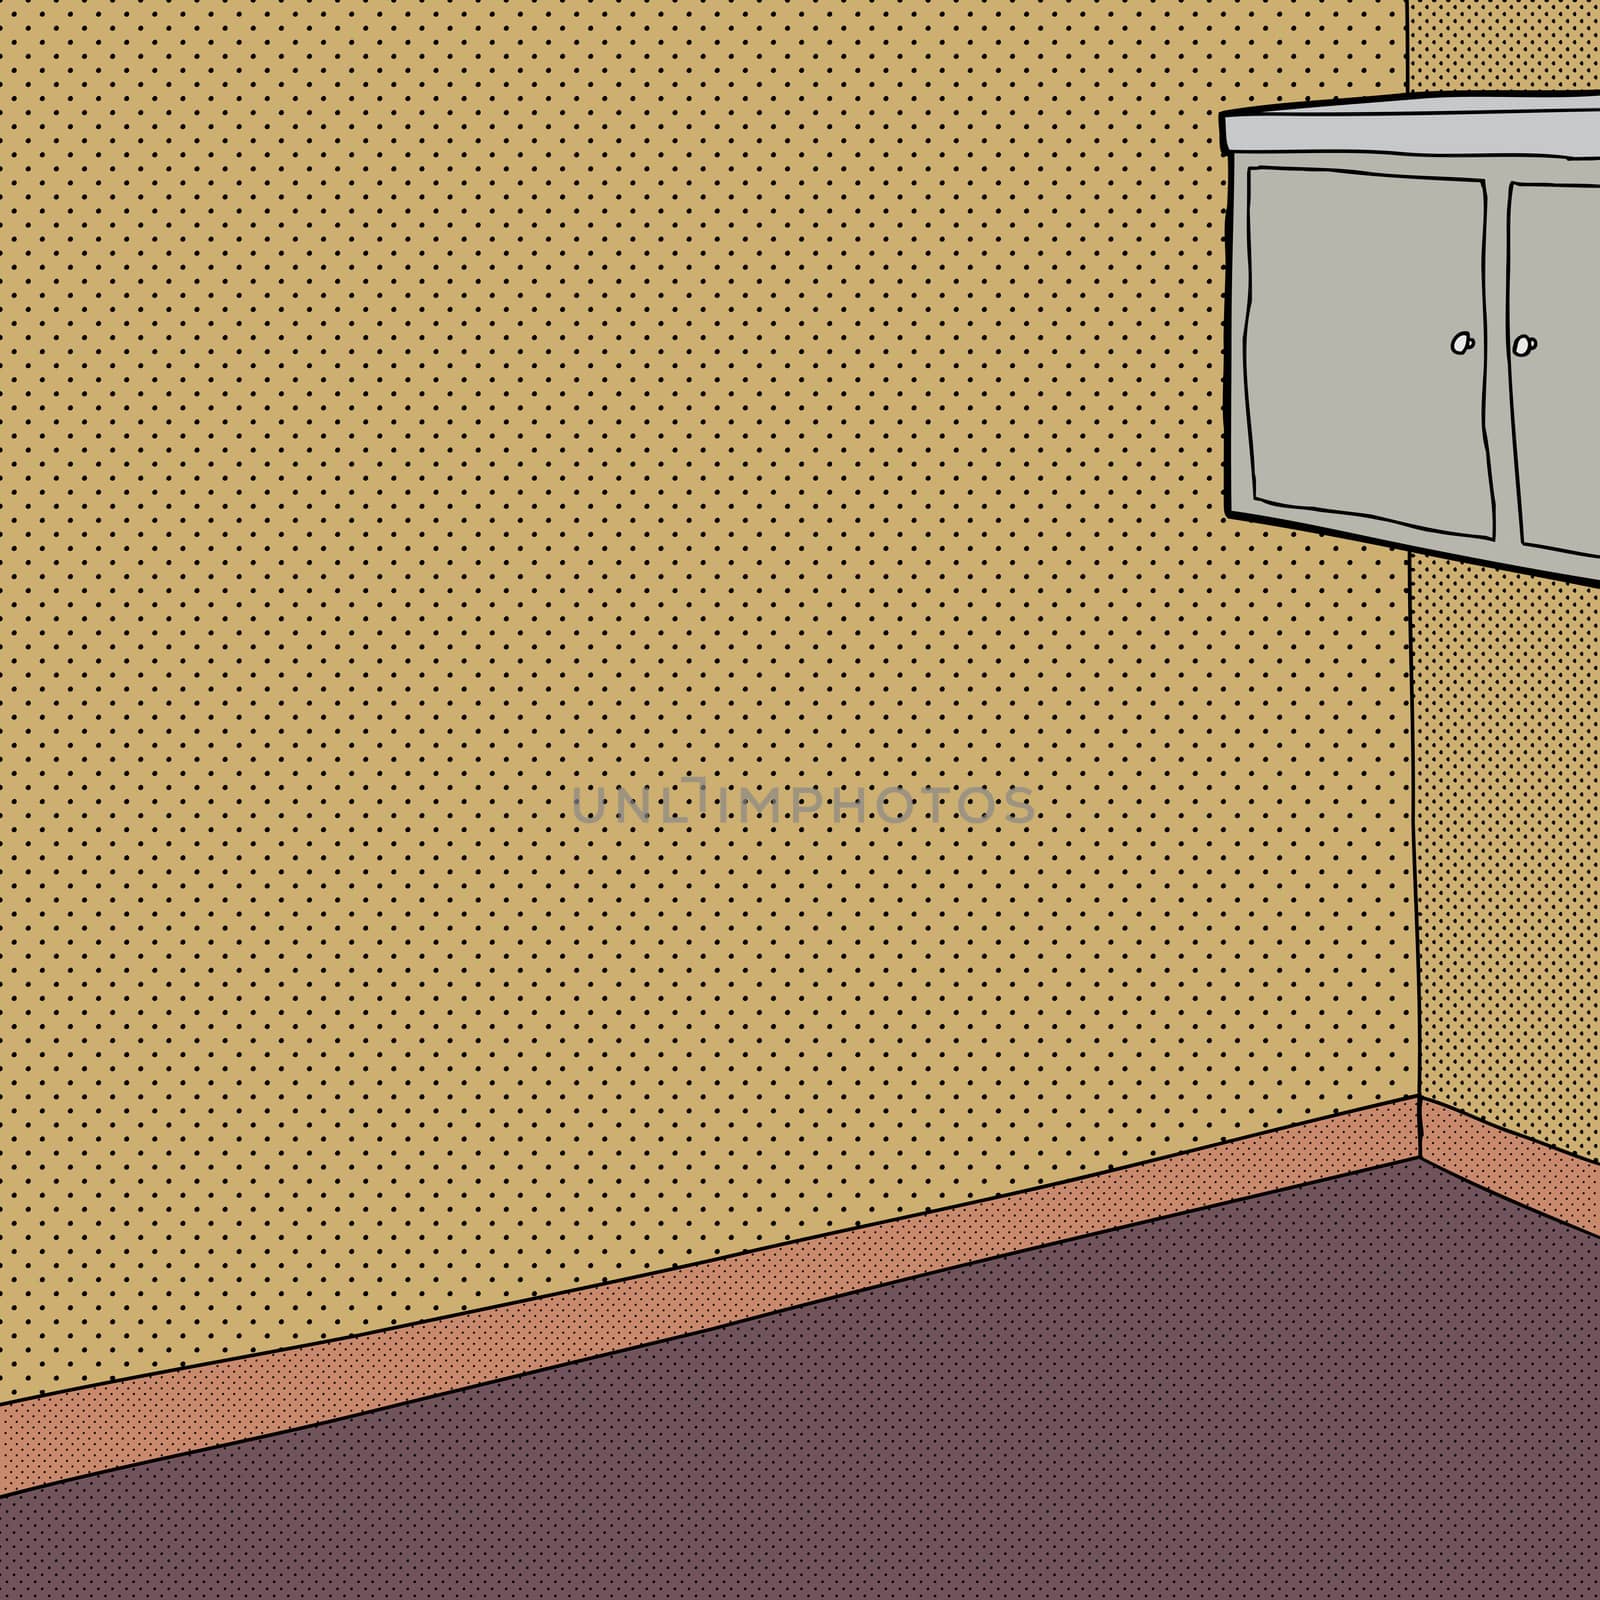 Cabinet on wall in room with halftone walls